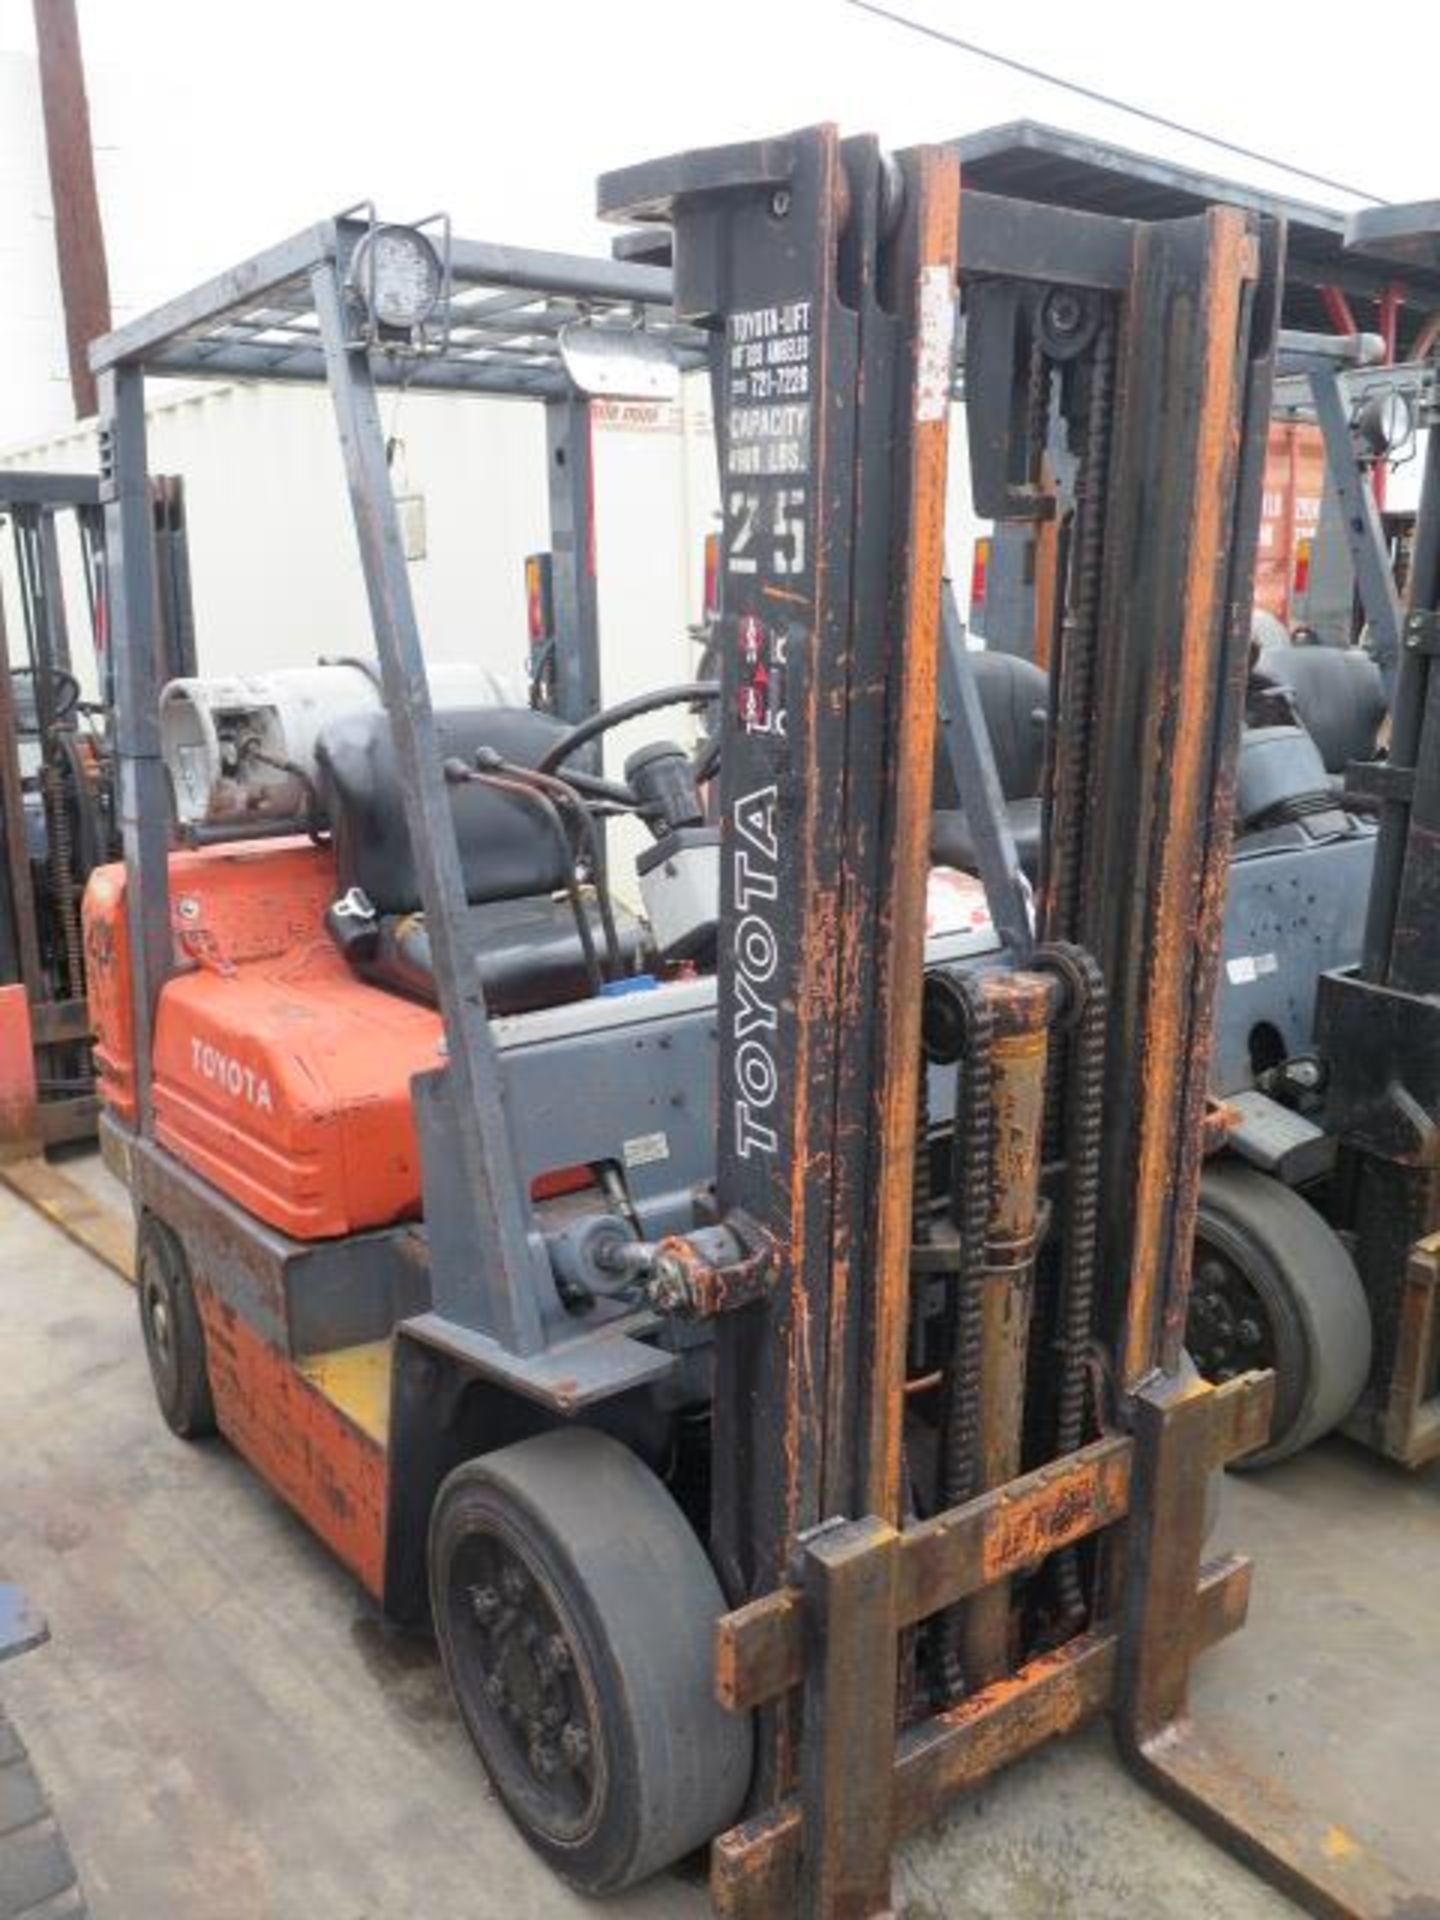 Toyota 5FGC25 5000 Lb Cap LPG Forklift s/n 85158 w/ 3-Stage Mast, 169" Lift Height, Cushion Tires, - Image 2 of 11